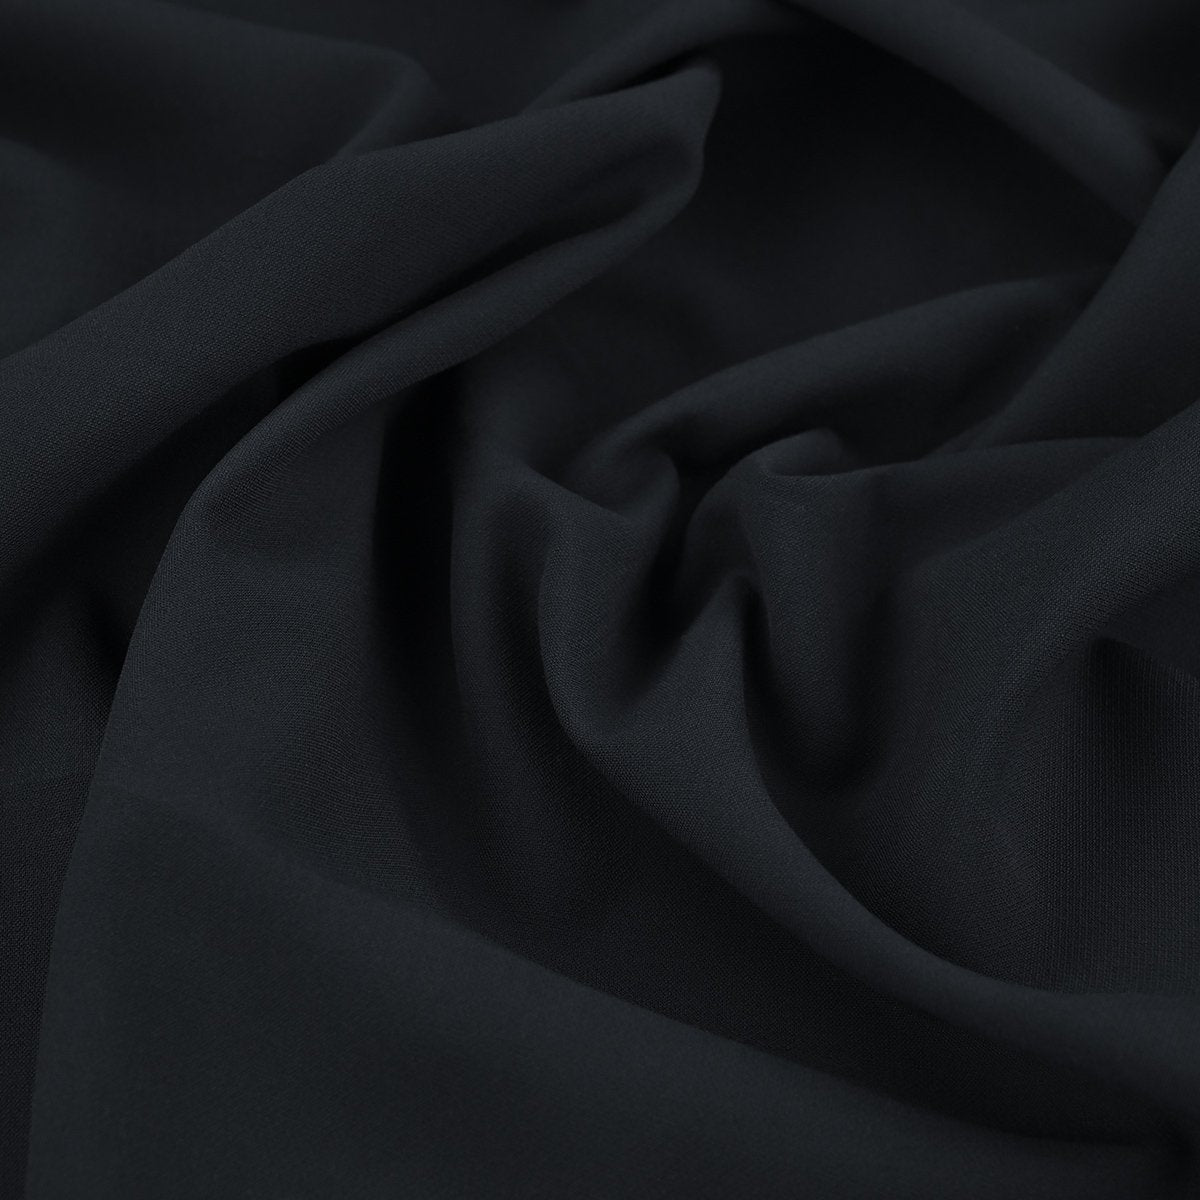 Navy Suiting Stretch Fabric 3707